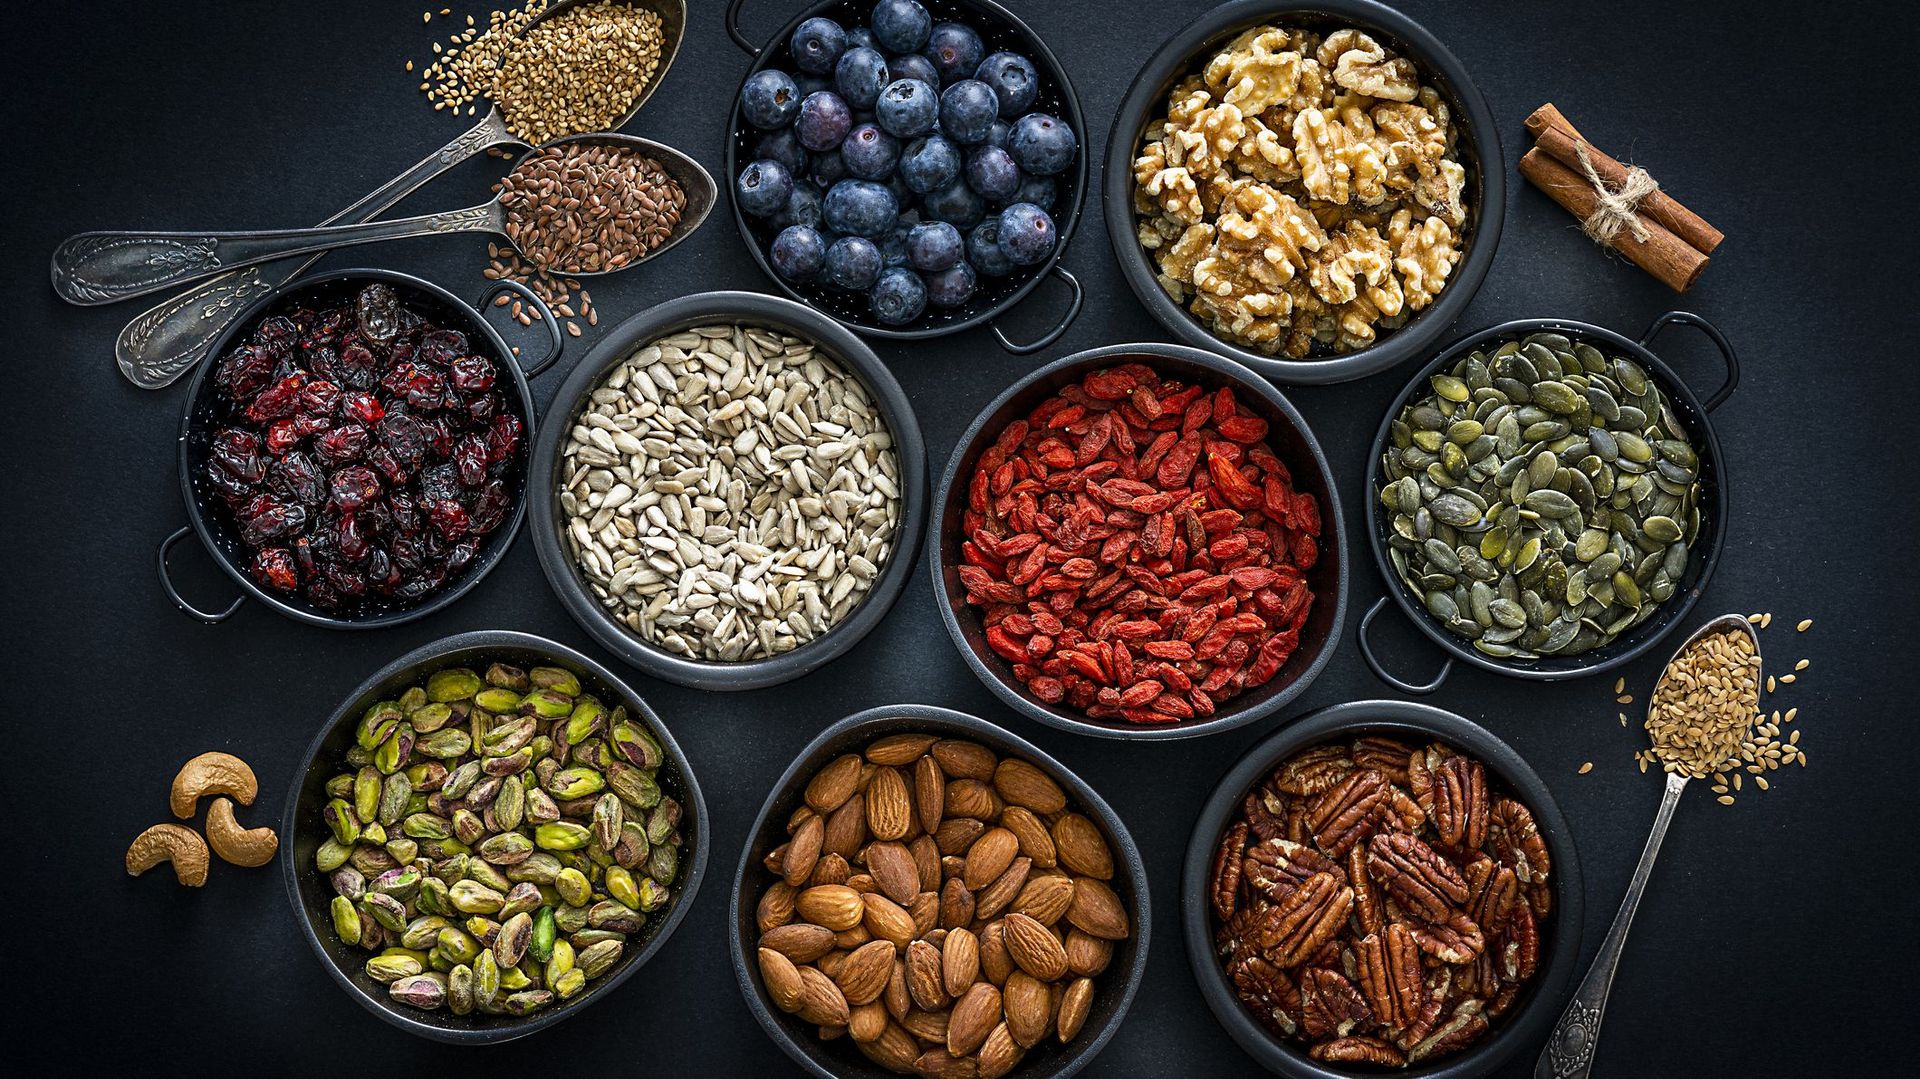 Healthy eating: assortment of nuts, seeds and fruits. Top view.